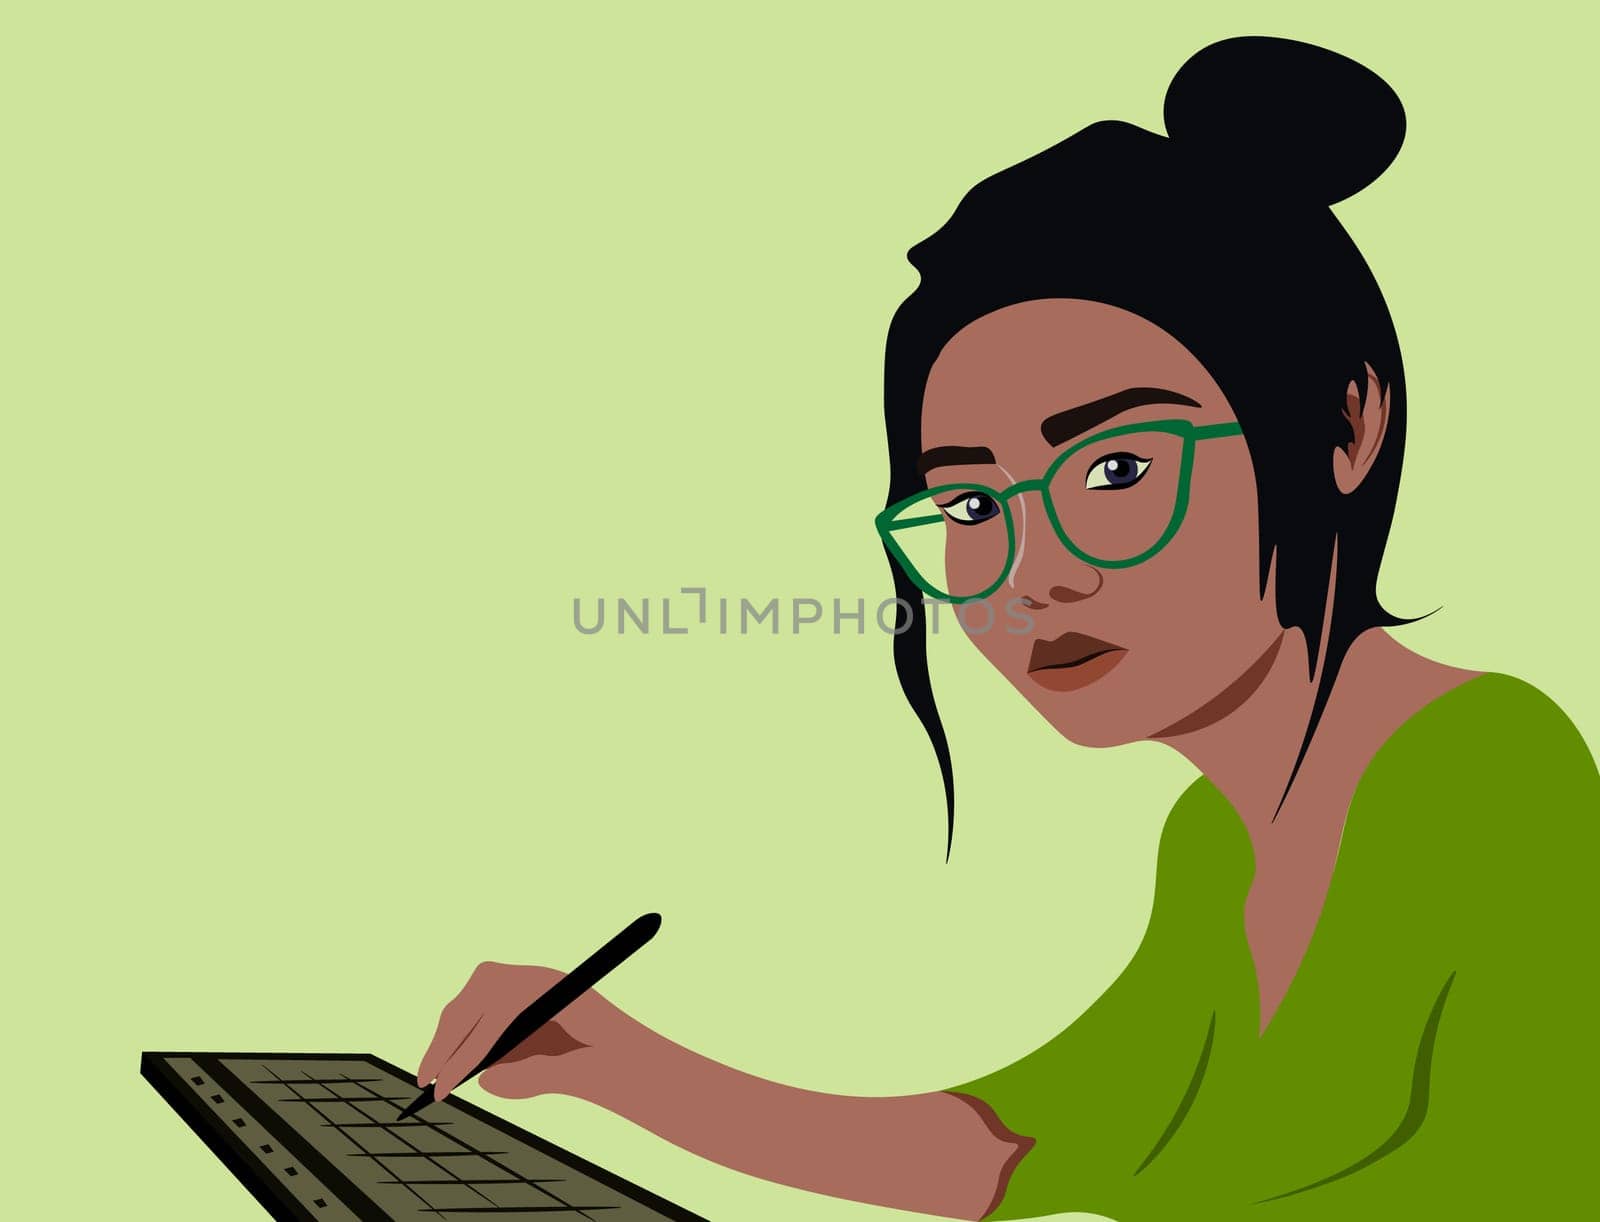 This is a colorful vector illustration of a Thai woman, adorned in a salad-colored outfit, immersed in digital drawing. She's skillfully maneuvering a stylus over a keyboard, ready to create another masterpiece. Her gaze towards the viewer brings a sense of direct connection. As a freelance digital artist, she embodies the spirit of independent creativity and tech-infused art